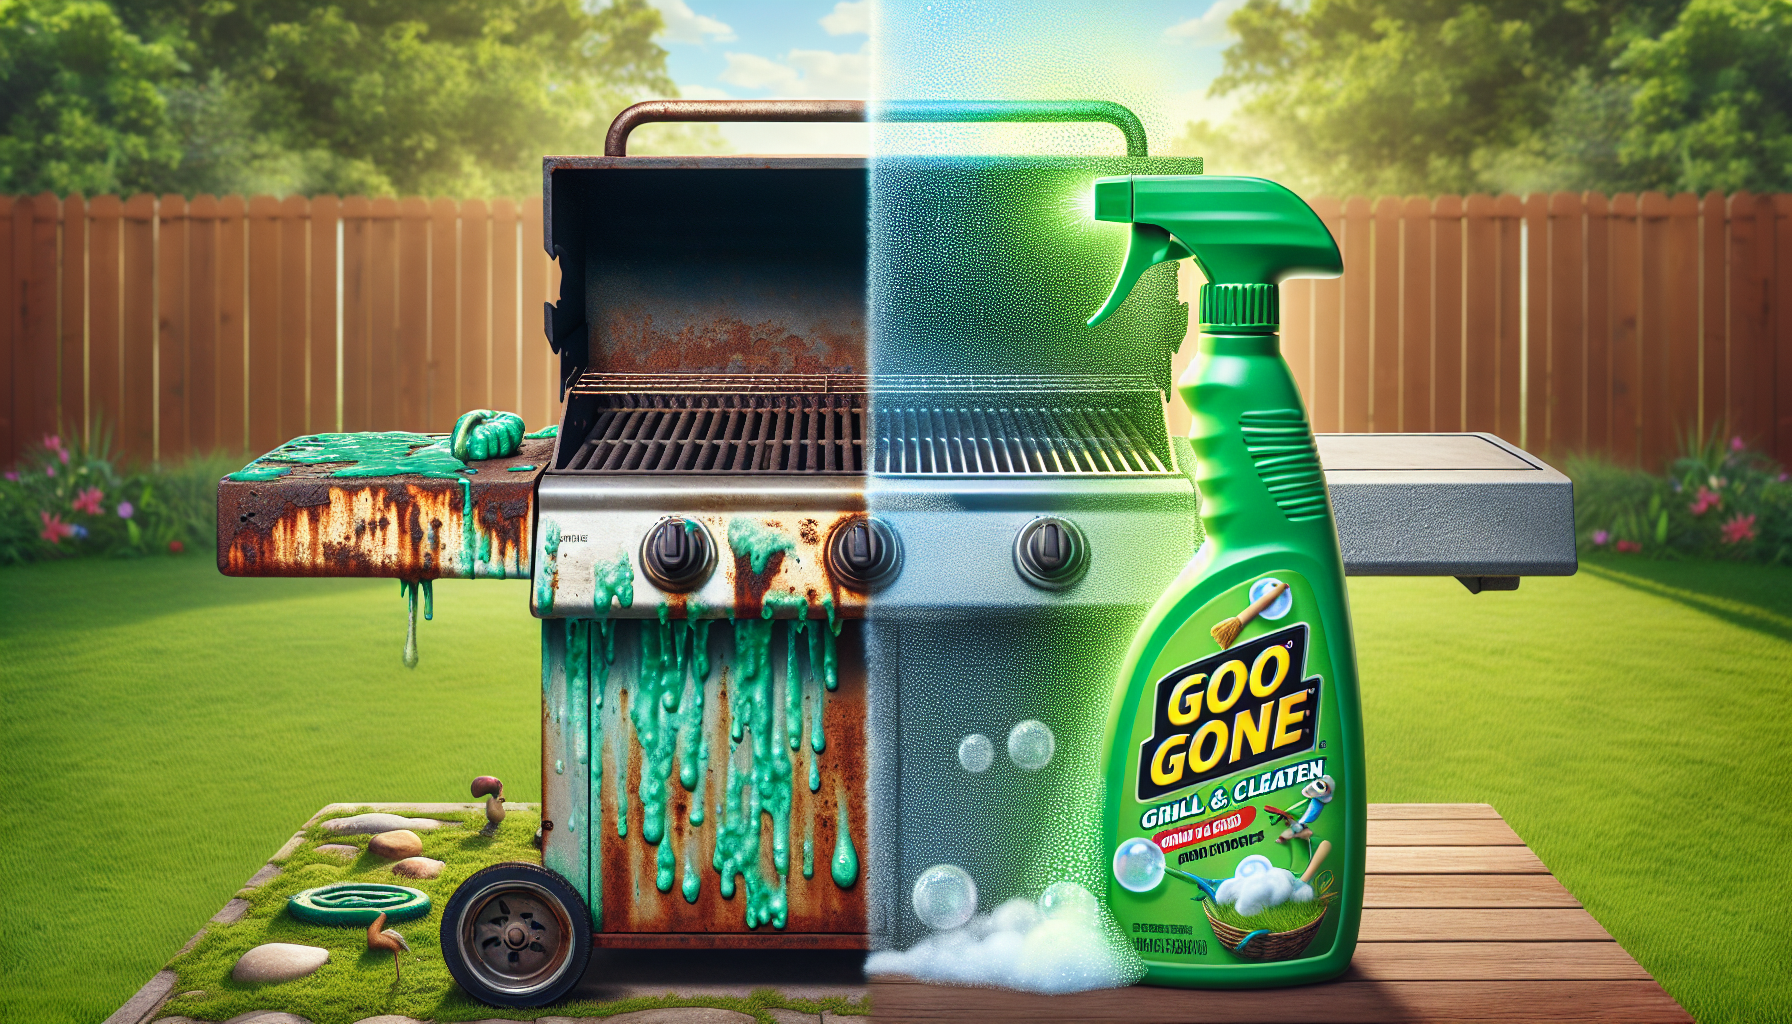 Make your grill shine with goo gone grill & grate cleaner: Budget-friendly and eco-conscious choice